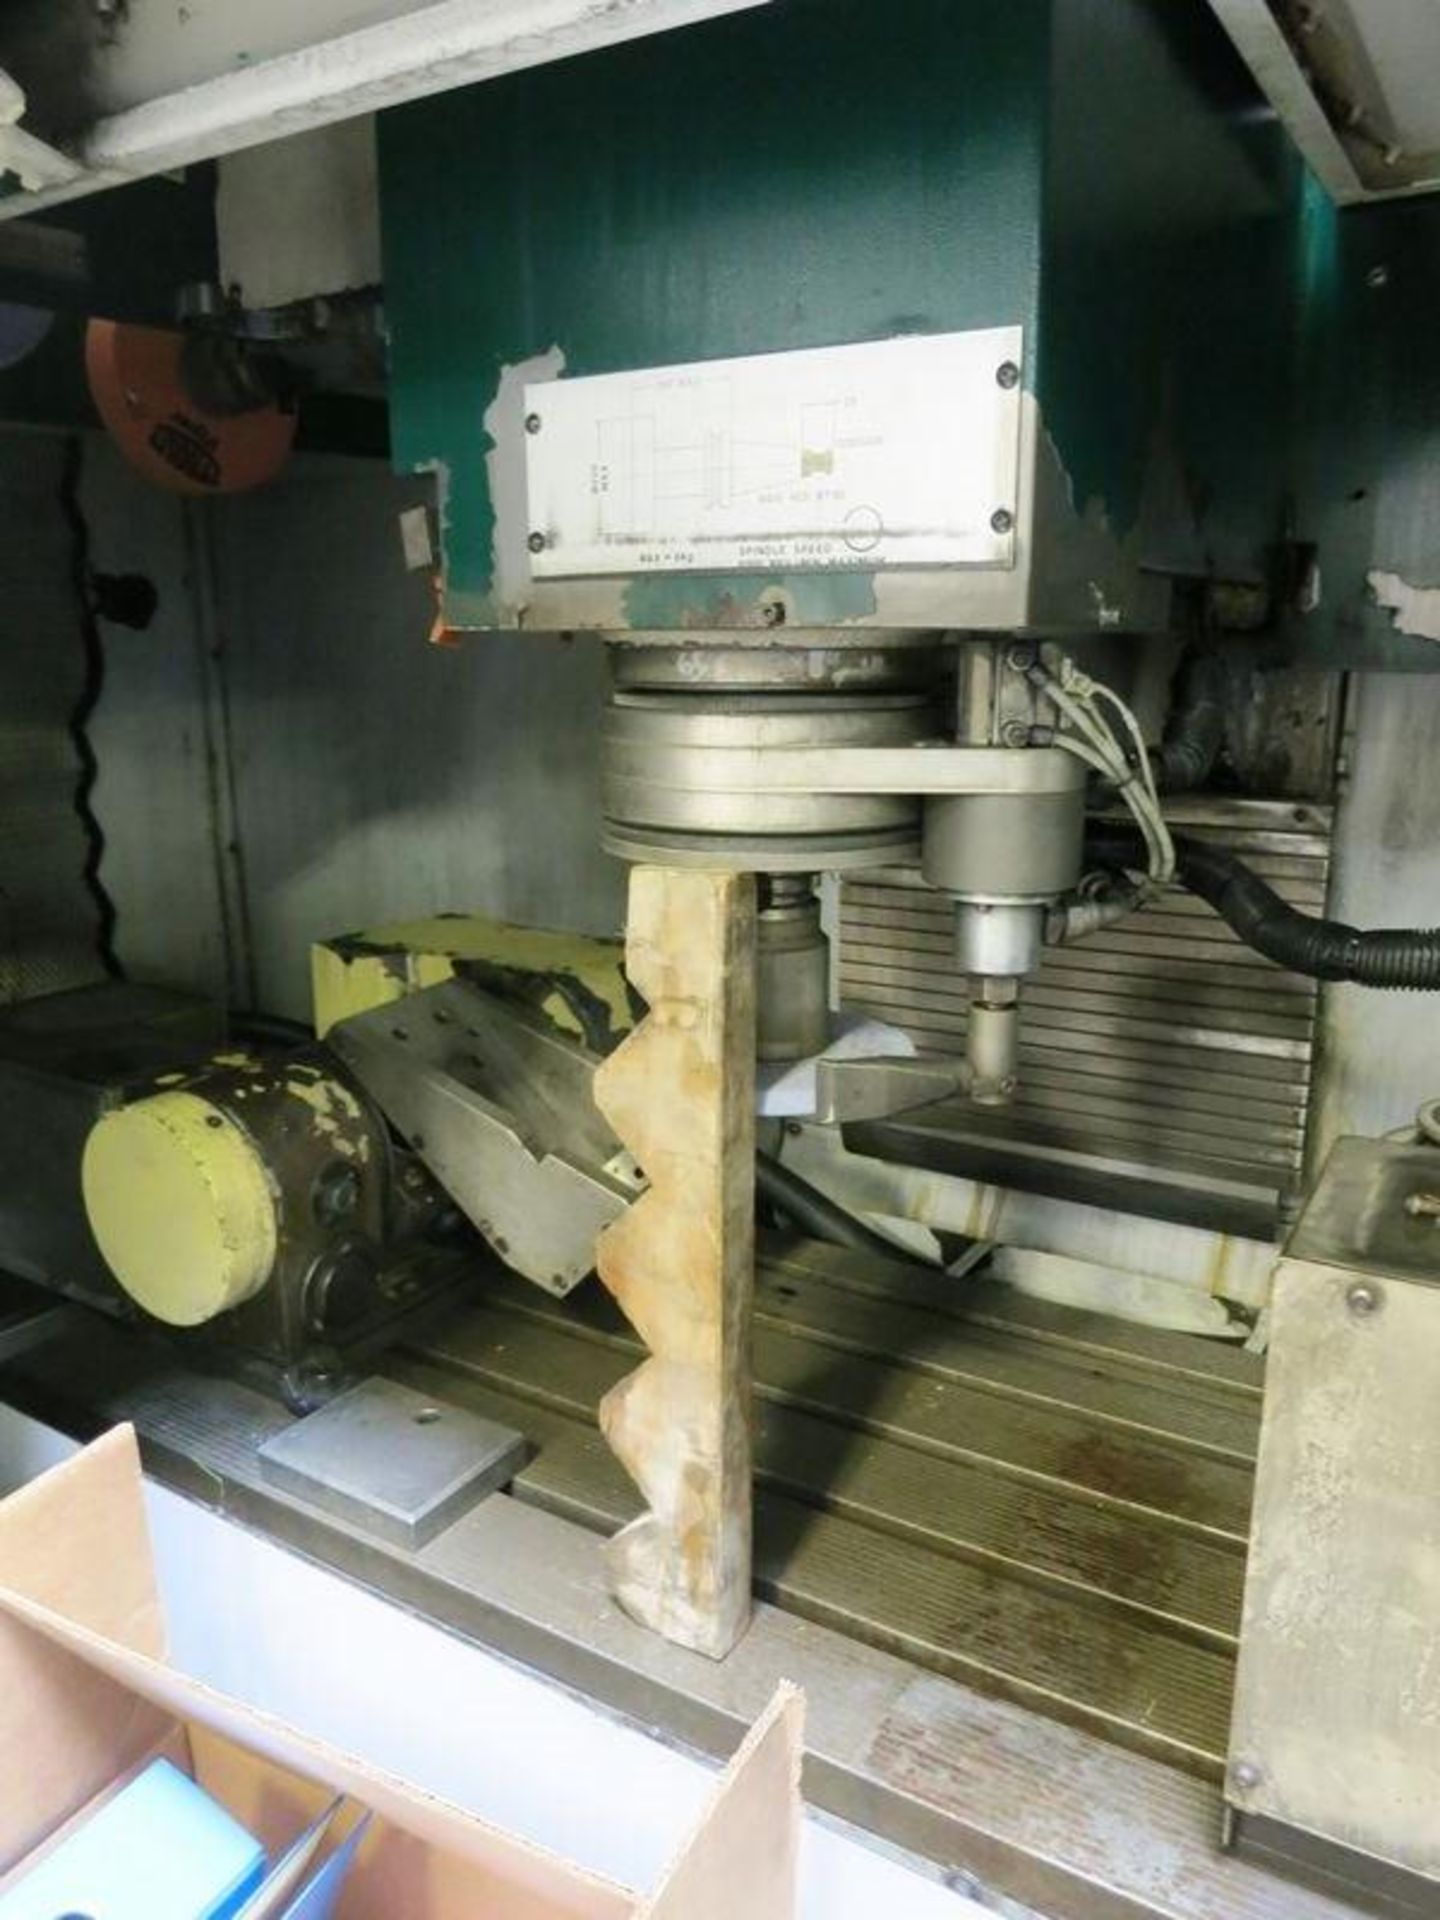 Bridgeport FGC-1000 5-Axis Vertical machining and Flexible Grinding Center for Turbine Blades, S/N - Image 5 of 11